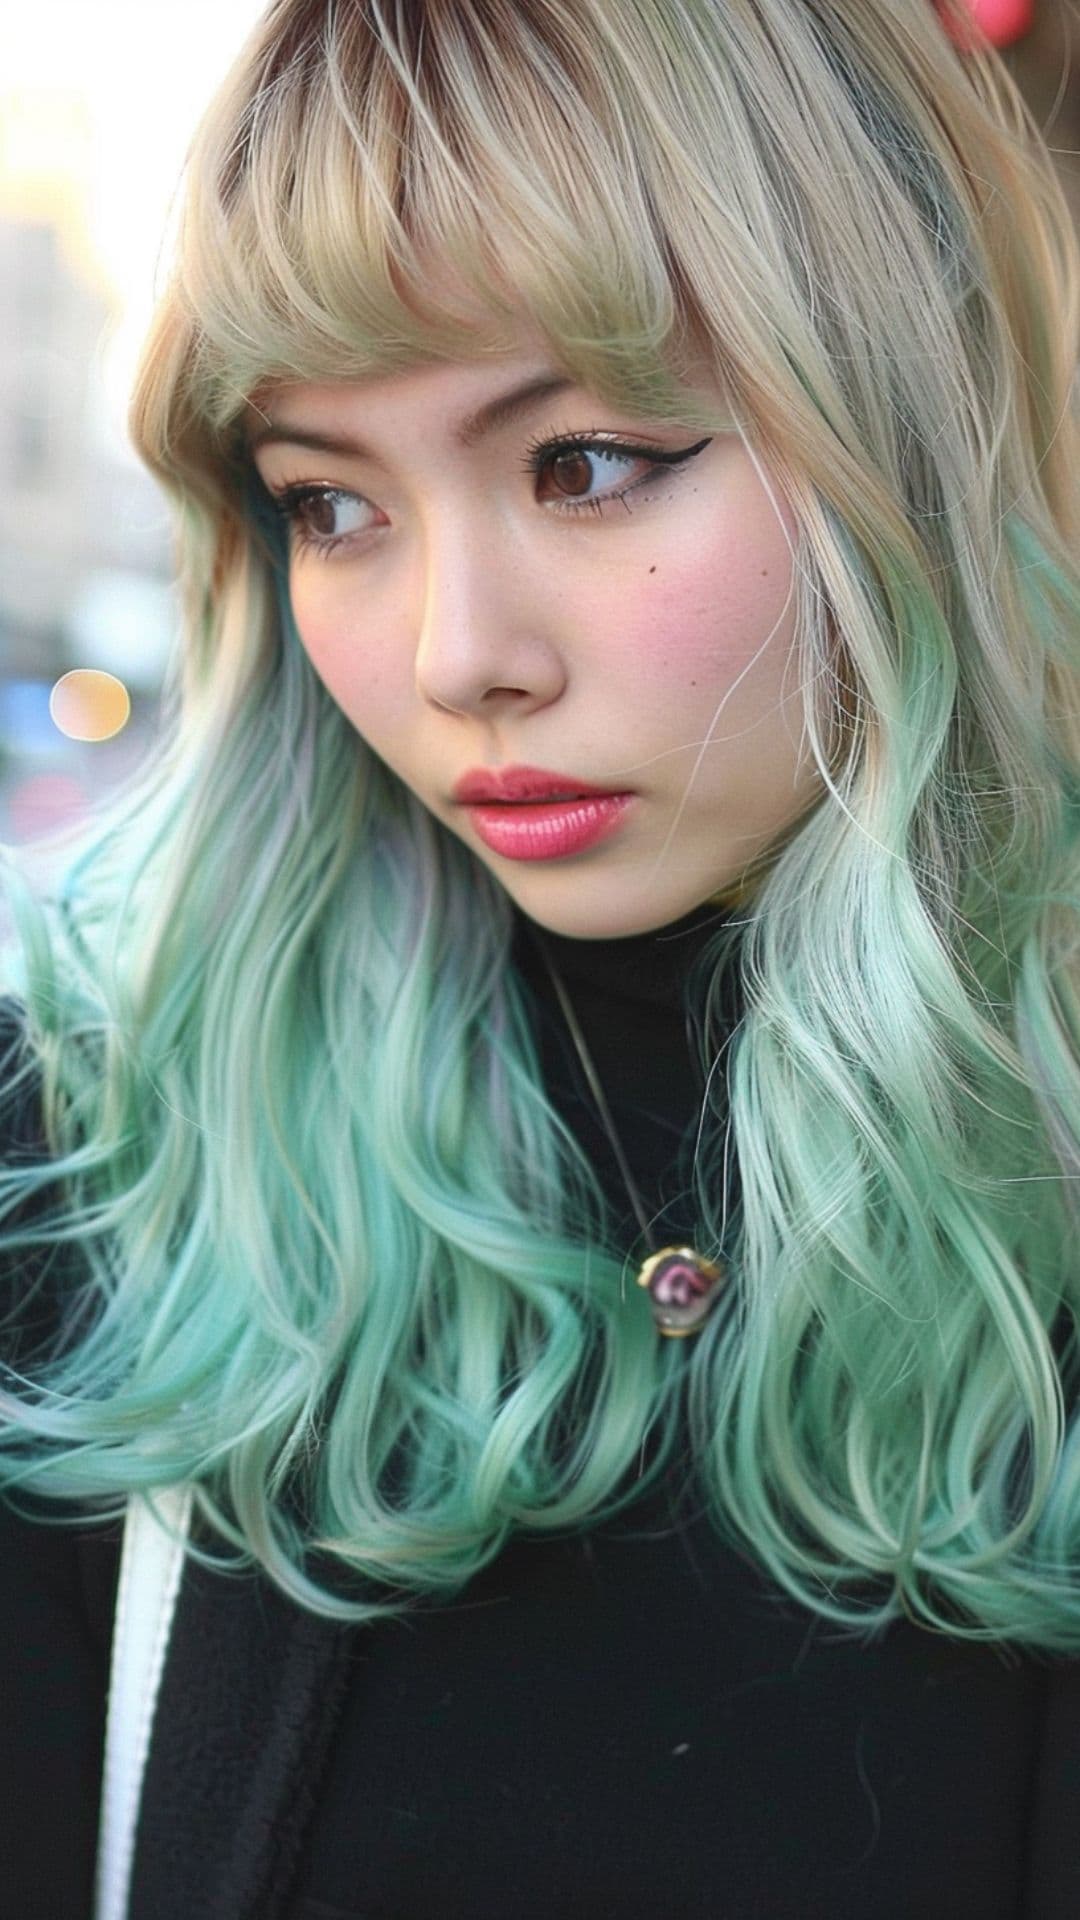 A woman modelling a blonde and mint green hair.